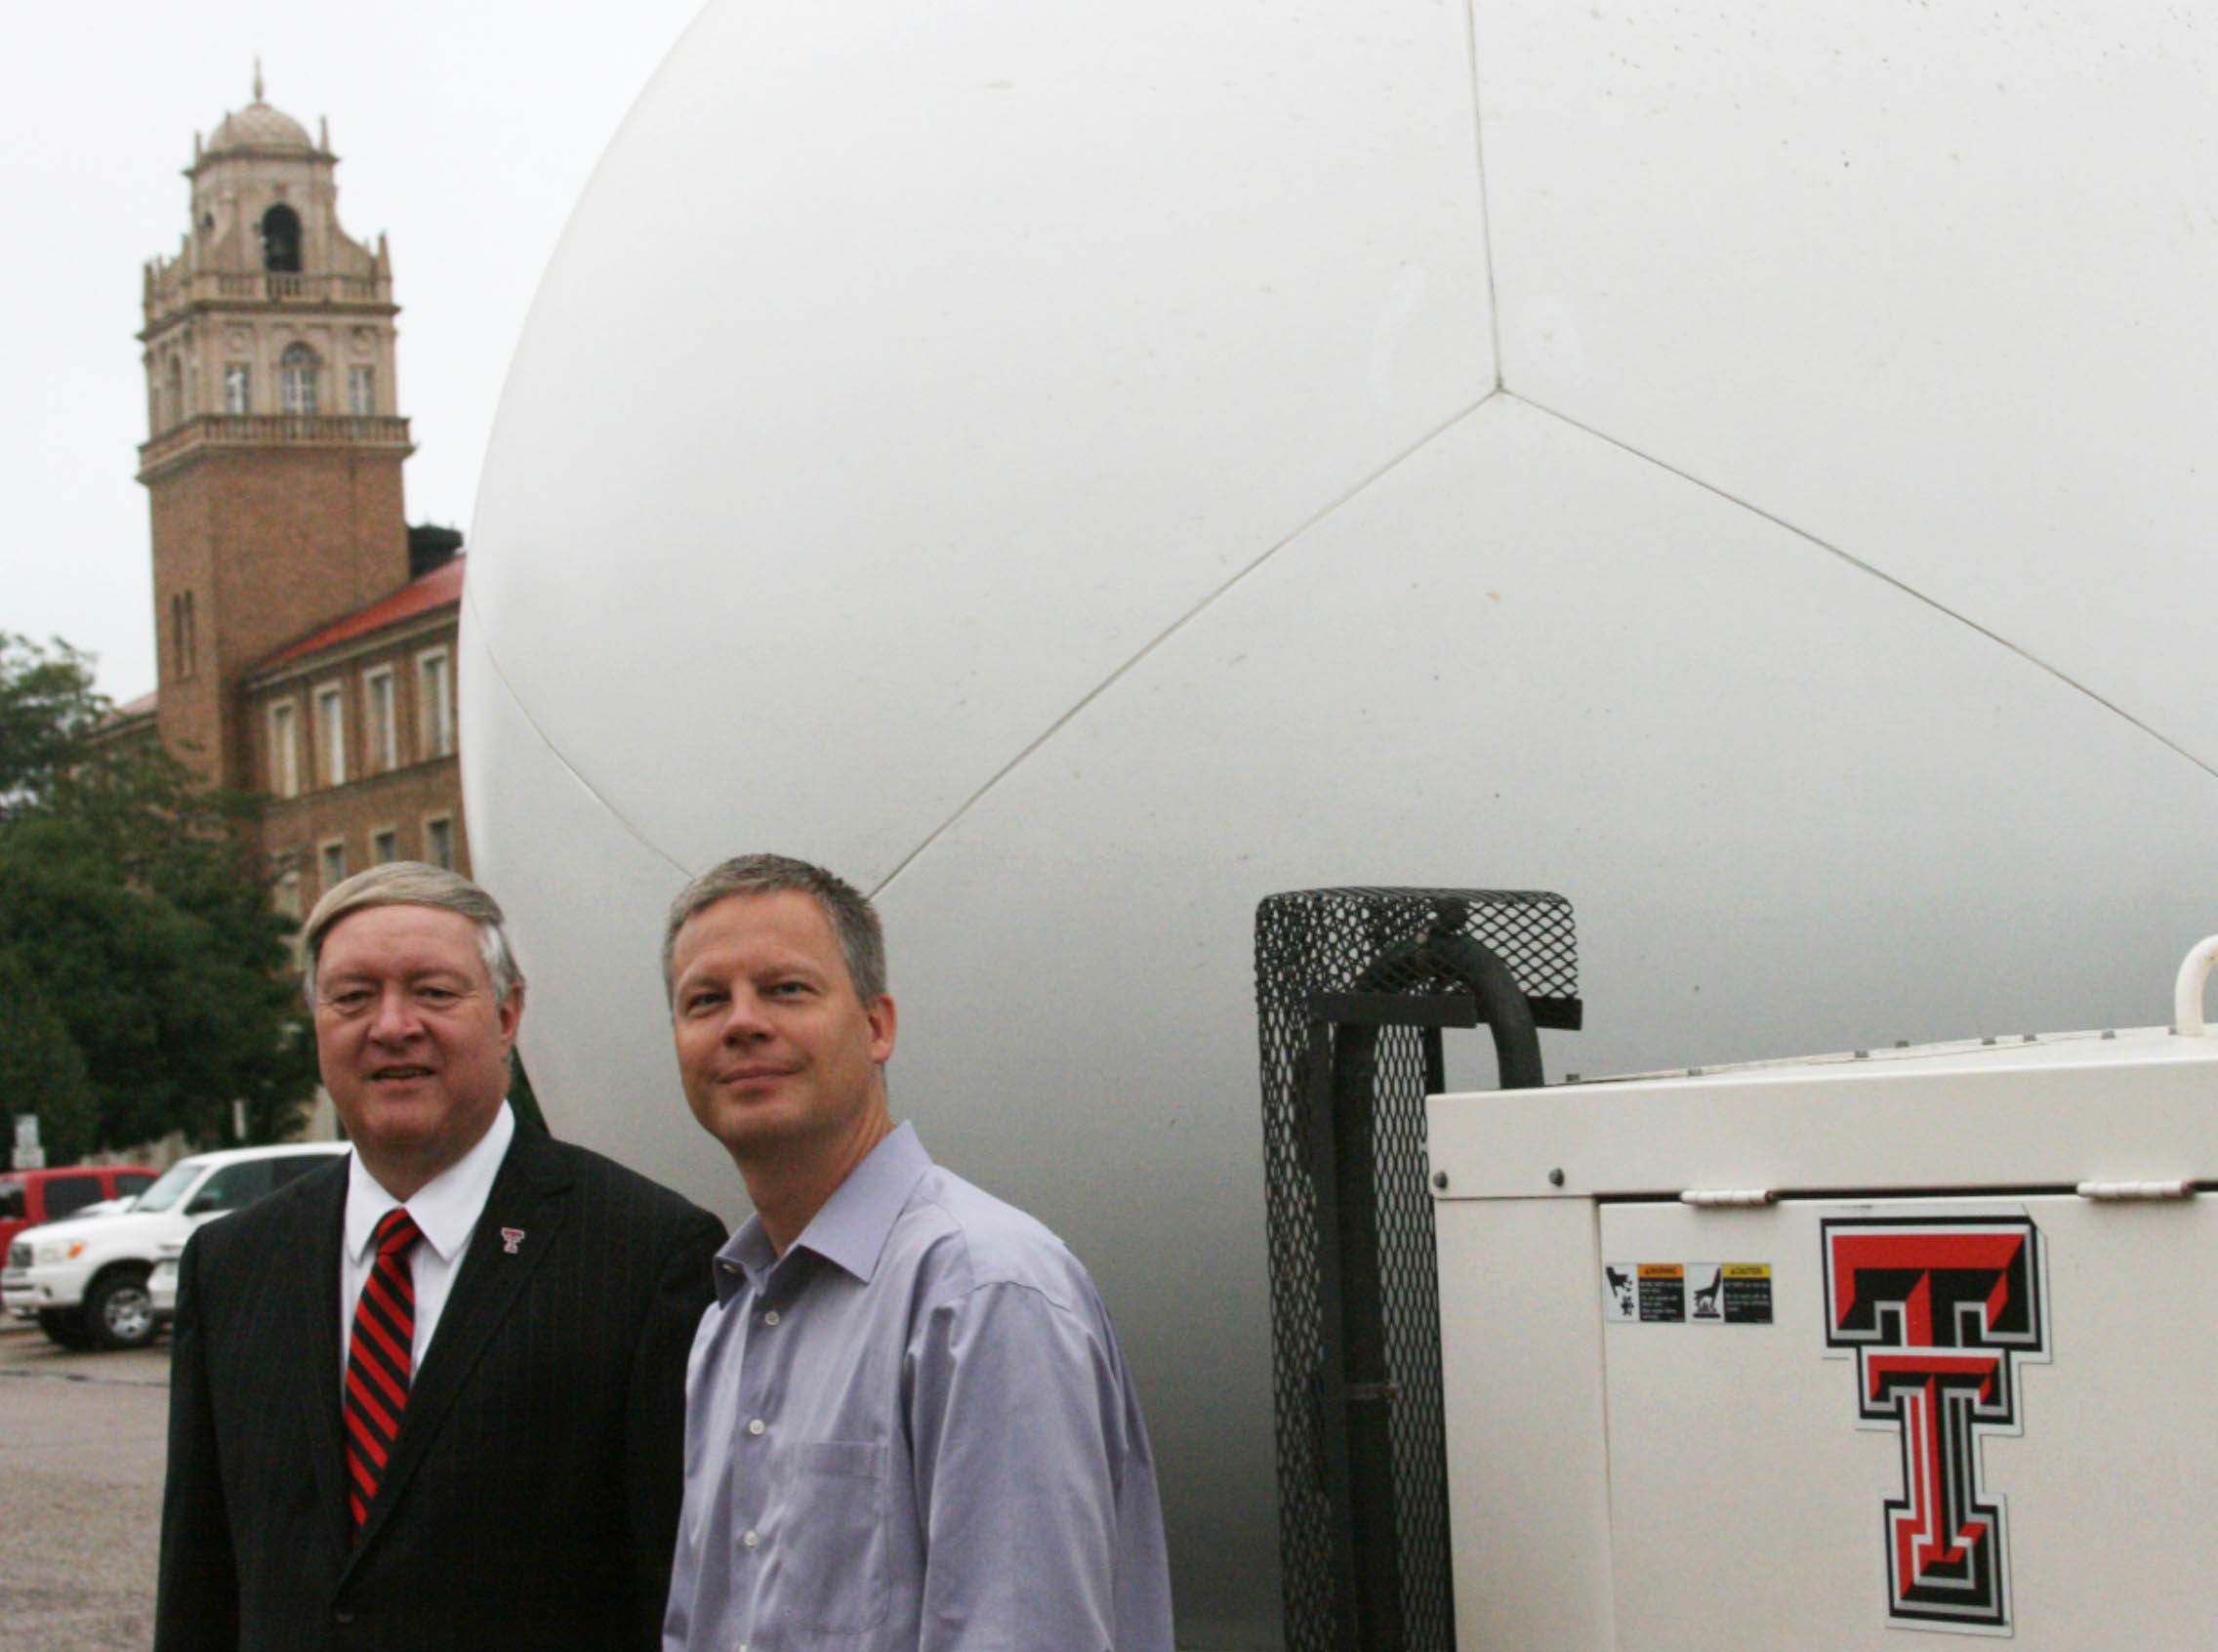 TTU President Dr. Nellis chats with former NWI Director Dr. John Schroeder by one of the NWI's Ka-band radar trucks. 